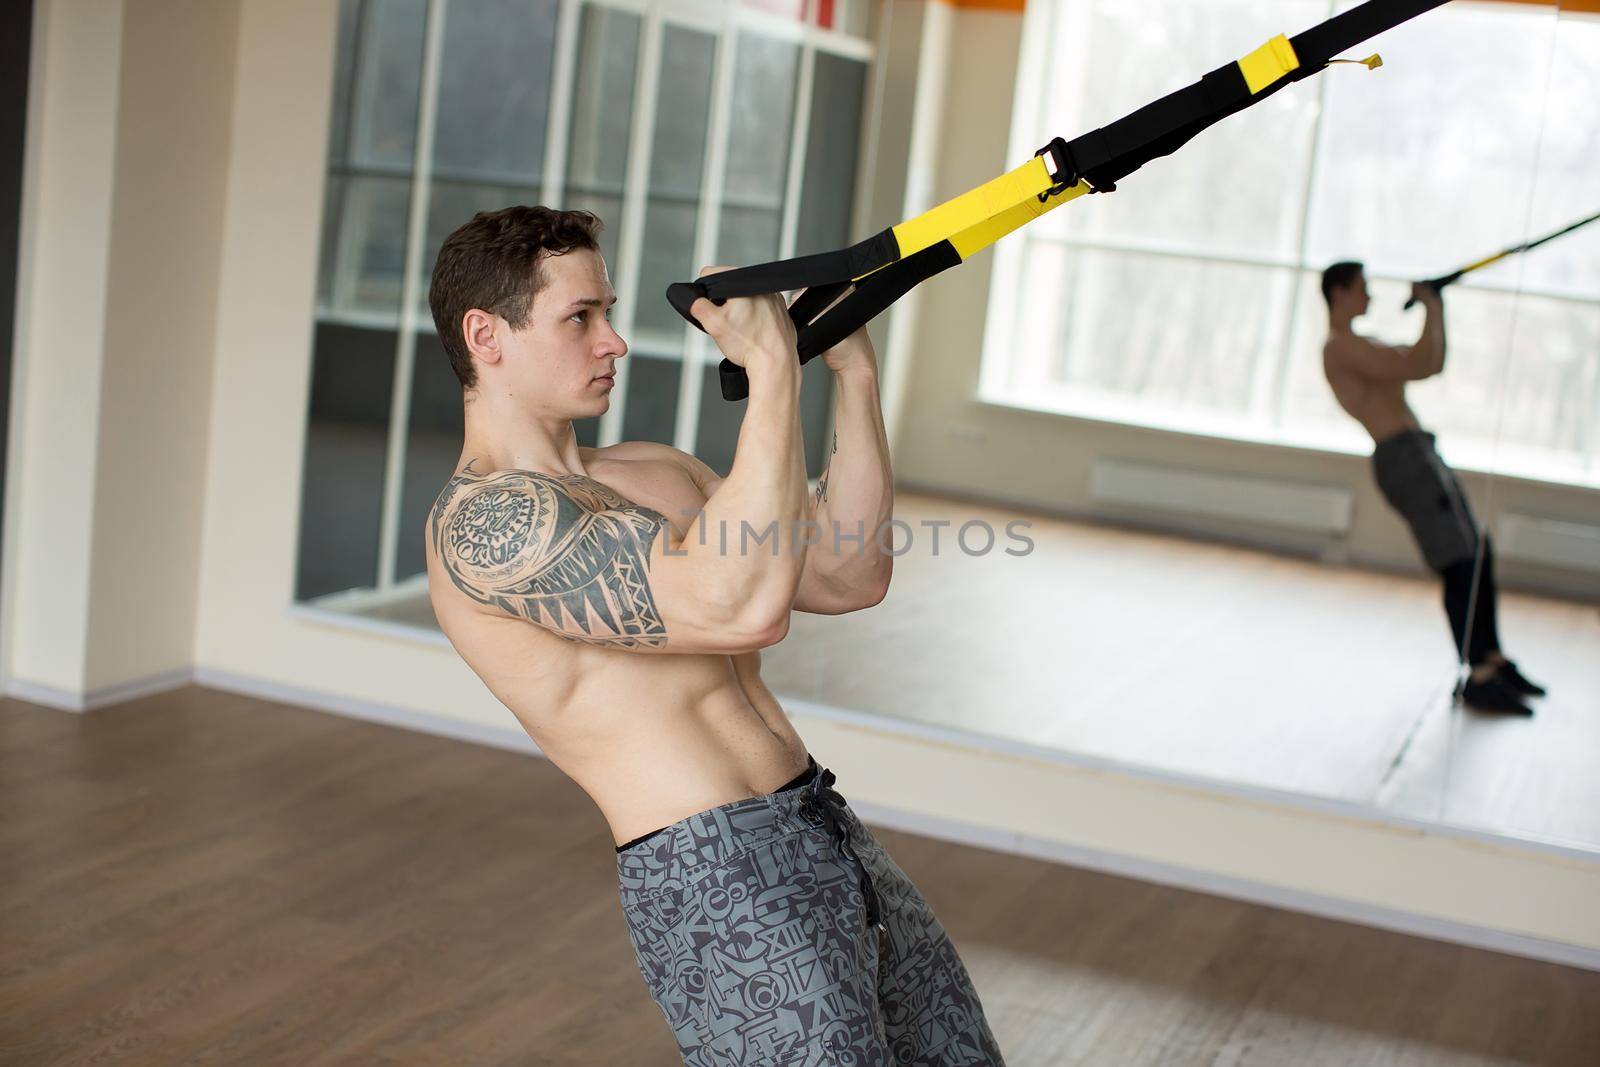 Young man training exercise push ups with trx fitness straps in the gym Concept sport workout healthy lifestyle.